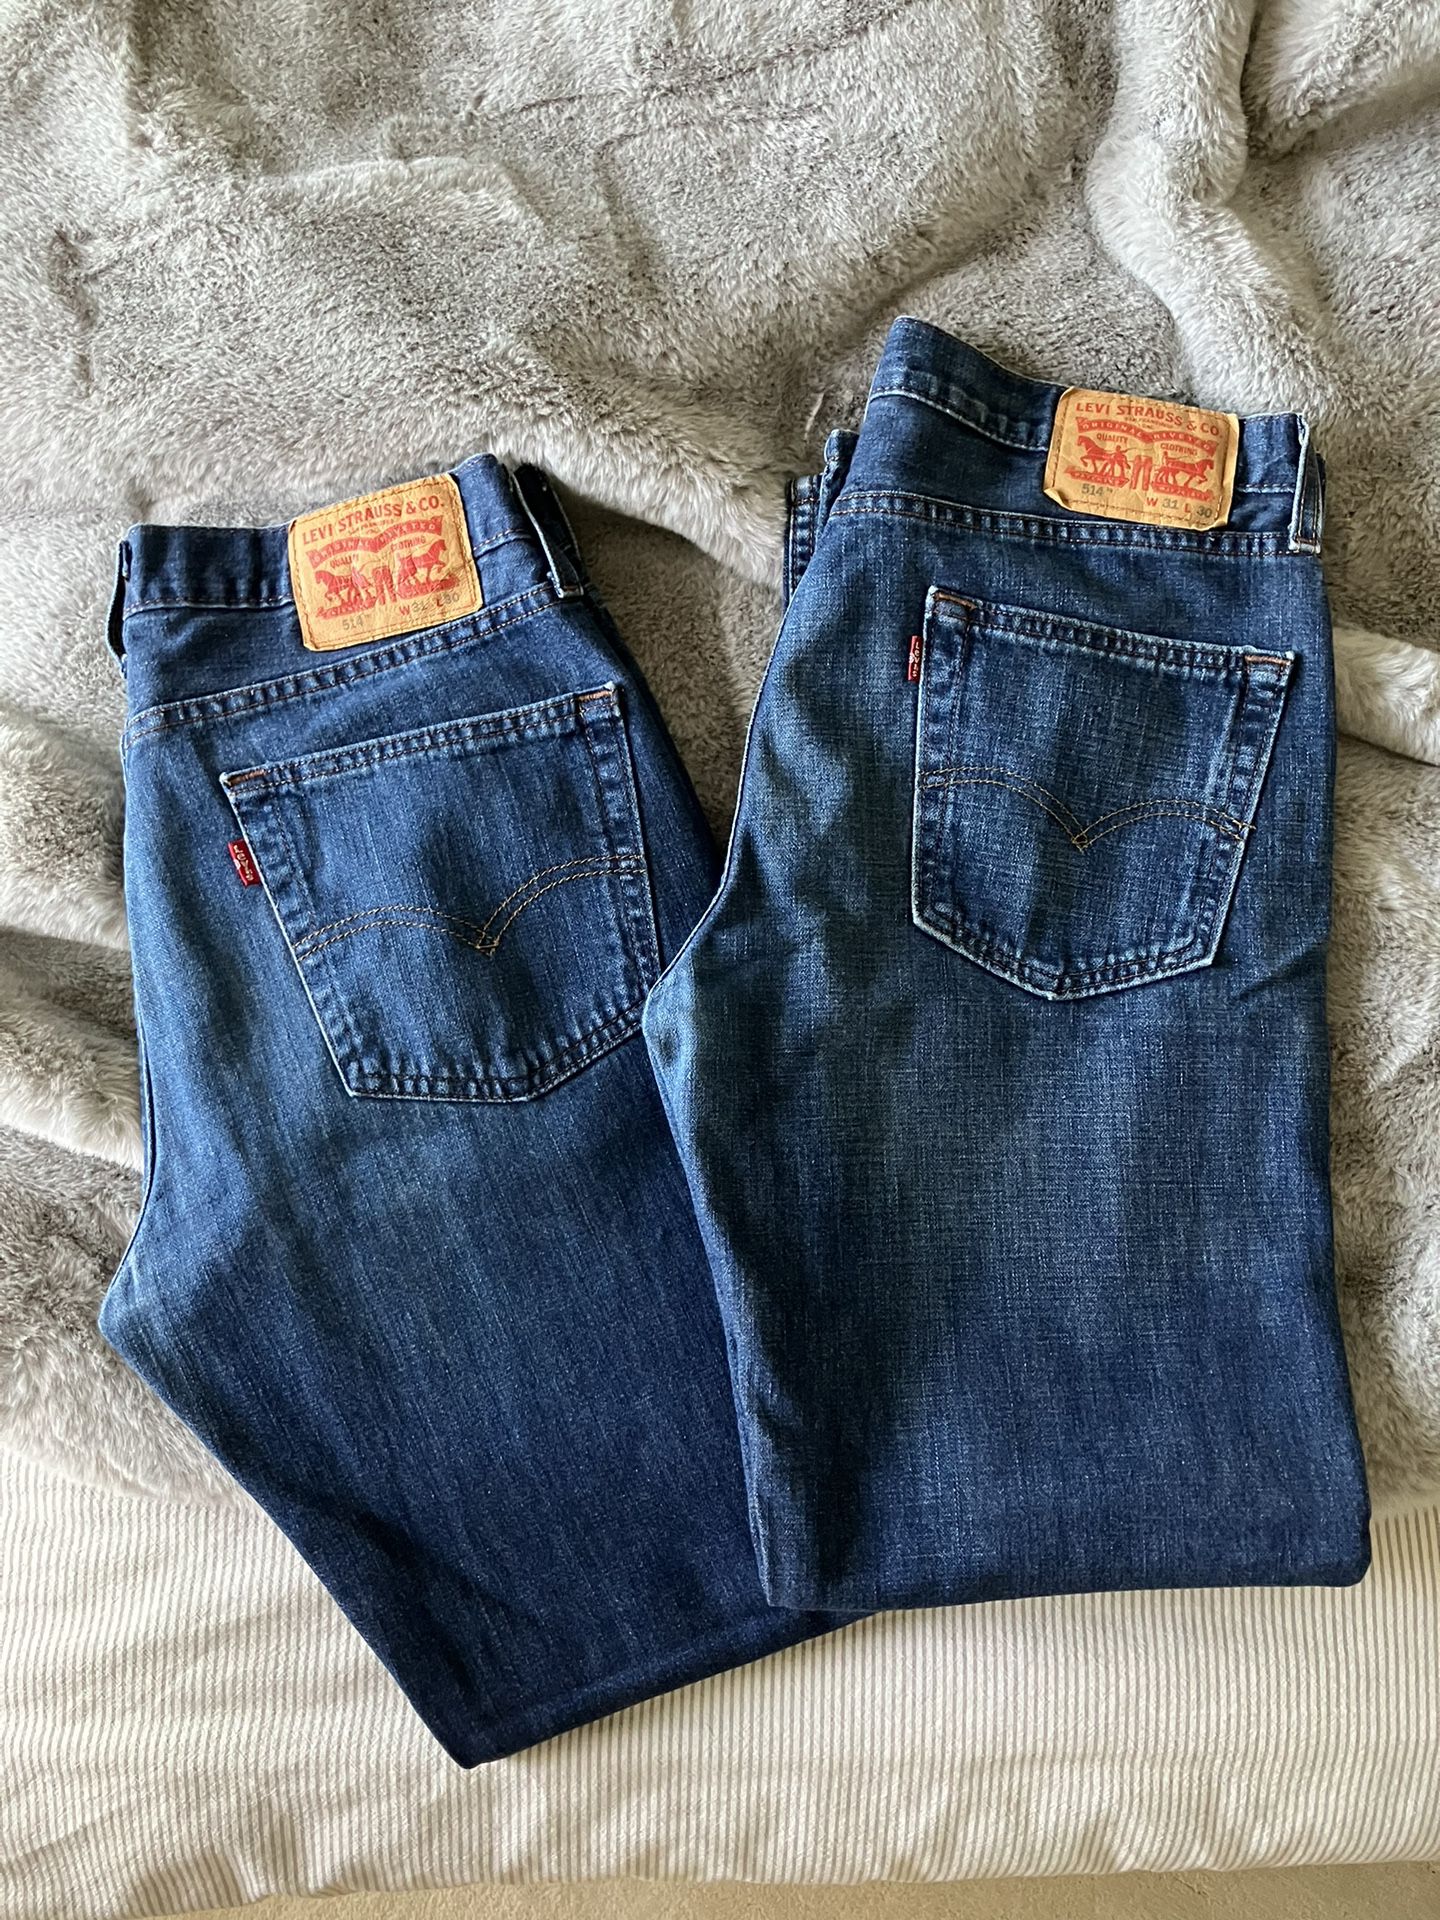 Men’s Levi’s 514 • Size 31x30 • Two Pairs, Same Color